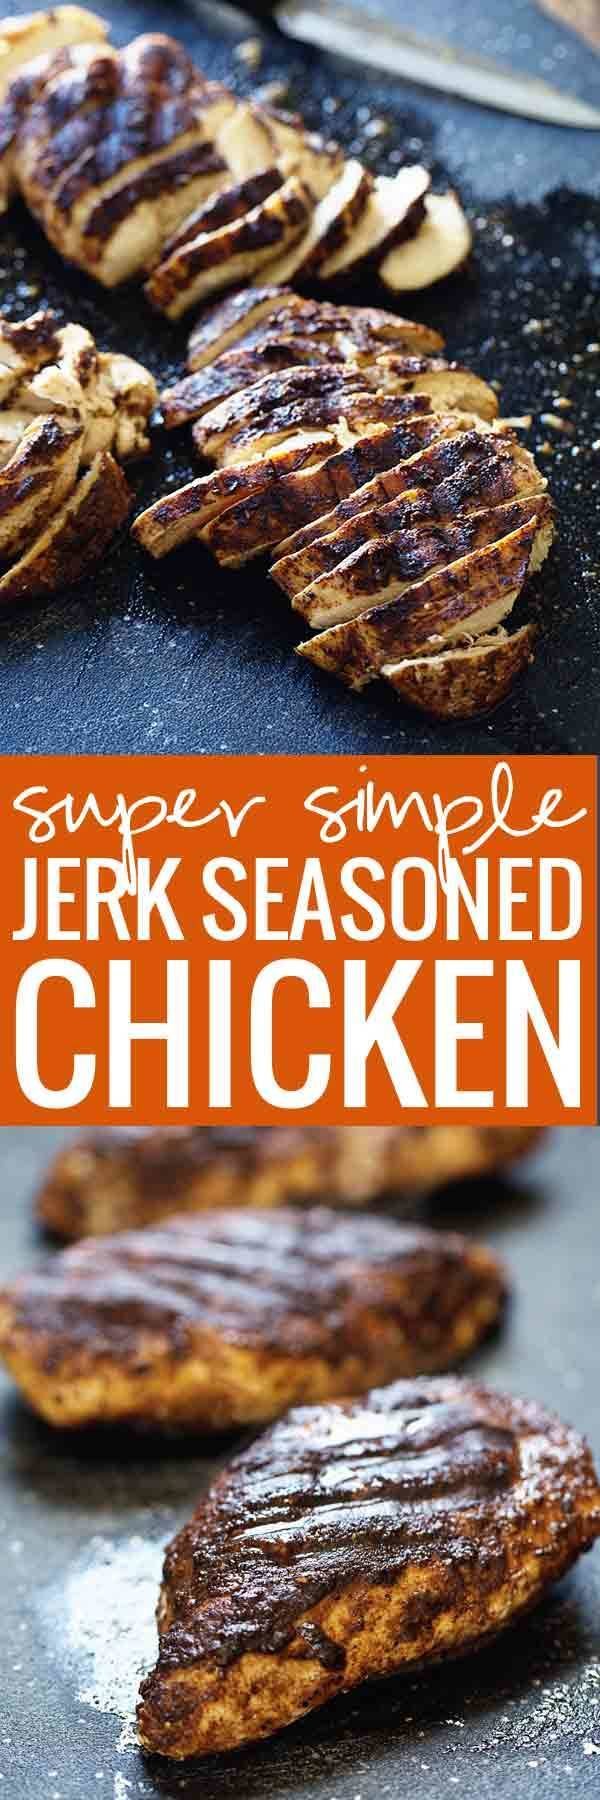 Super Simple Jerk Chicken - juicy, fragrant, spicy, and ready in 10 minutes. | pinchofyum.com